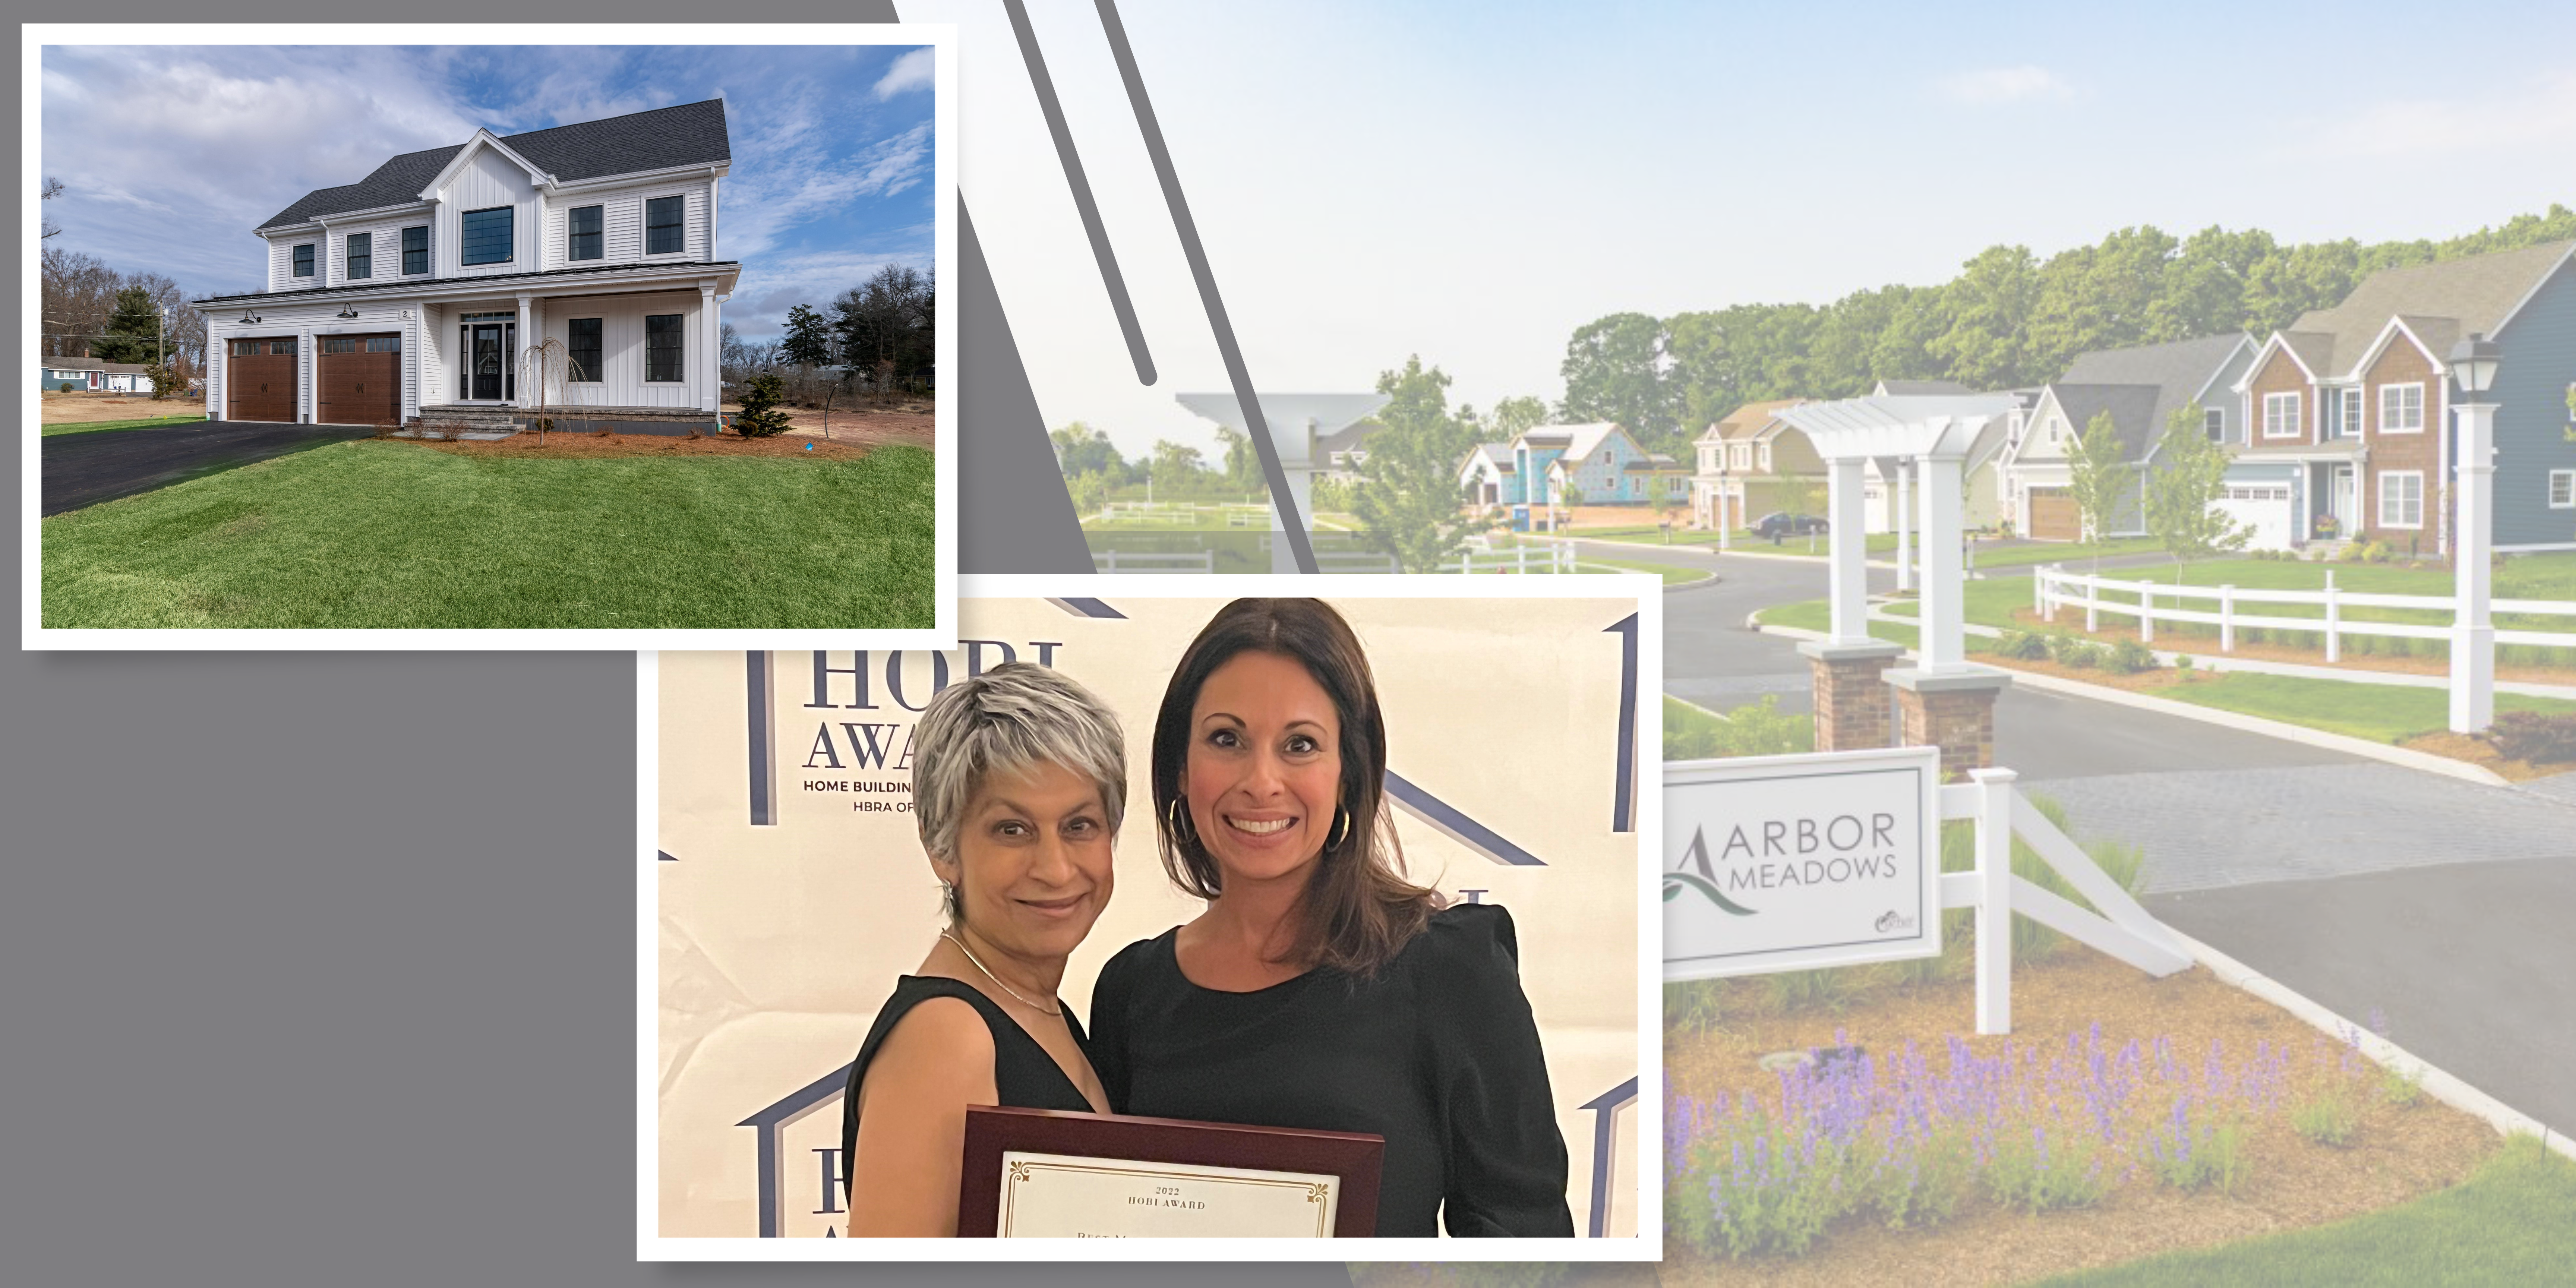 Photo of the entrance to Arbor Meadows of Cromwell, a white custom colonial home, and the two sales consultants Daniela Volo and Maryam Taylor